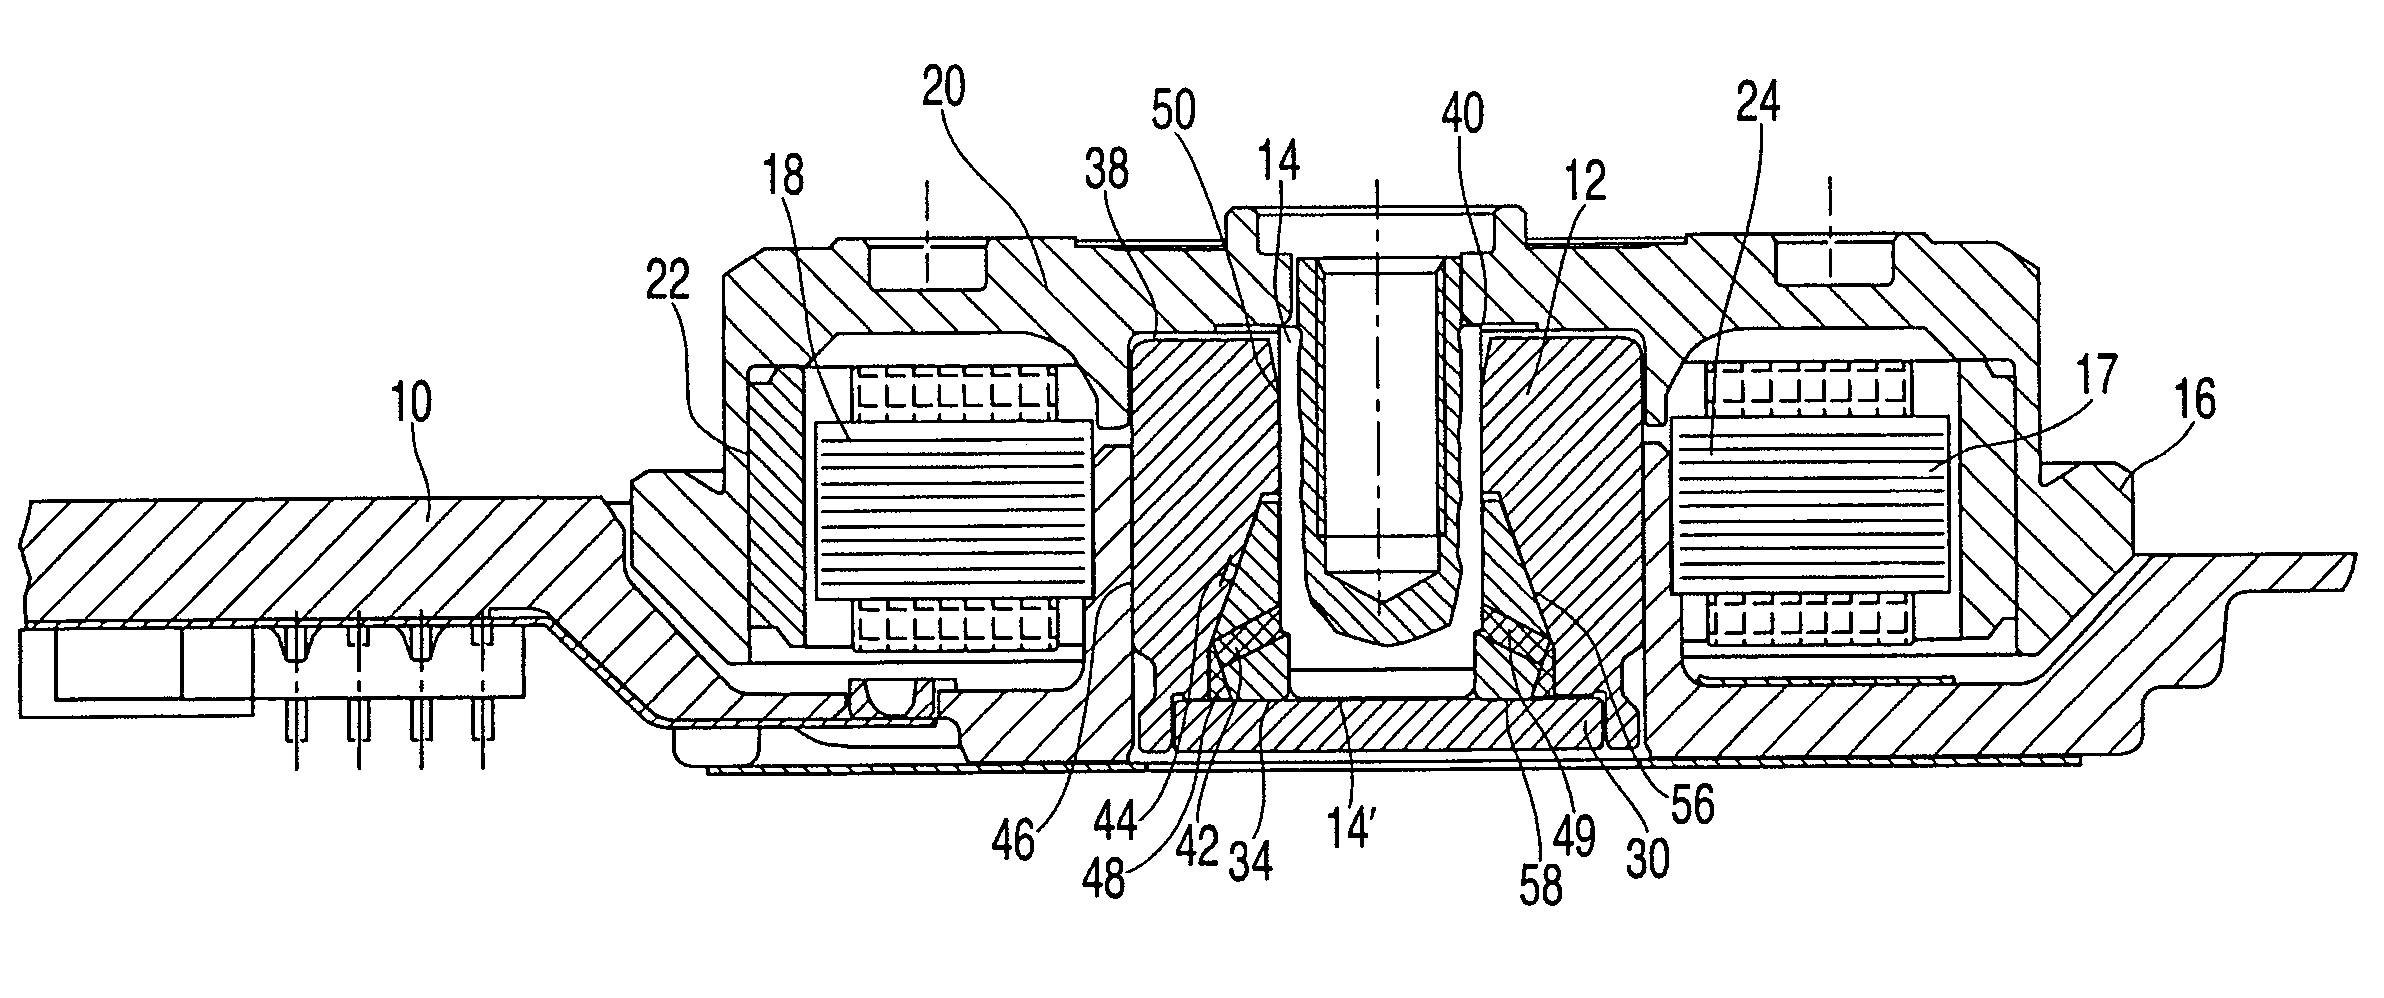 Hydrodynamic bearing for a spindle motor